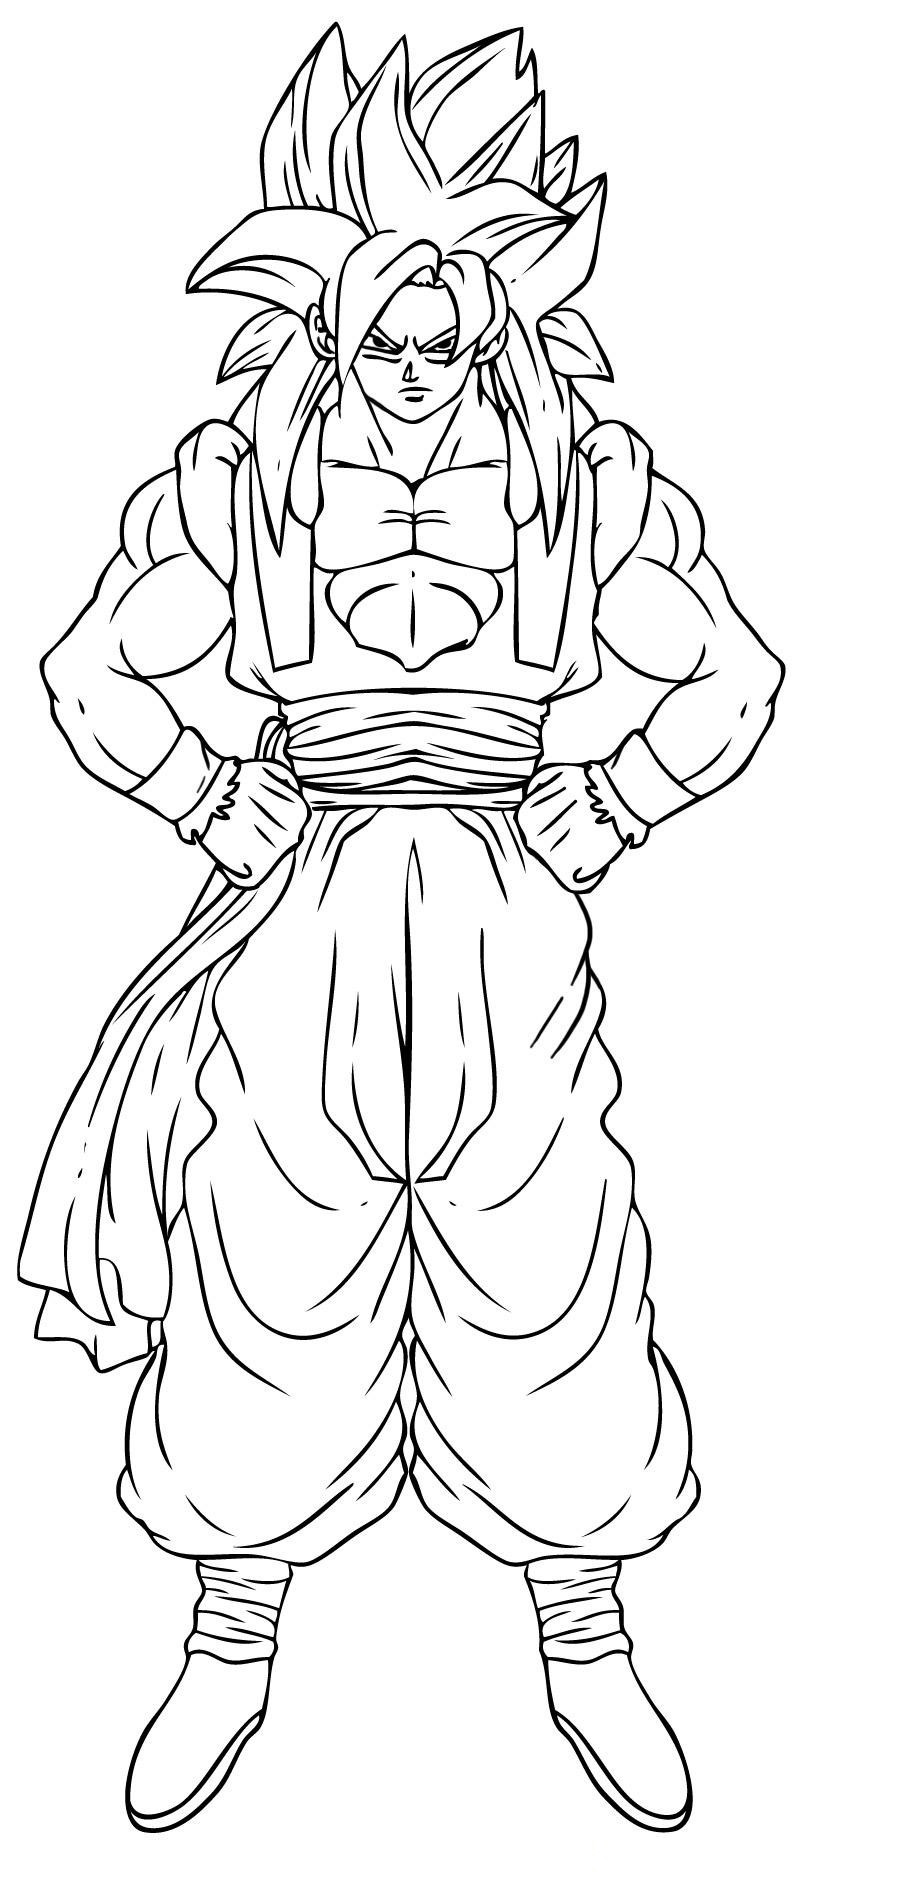 Dragonballz Coloring Pages
 Free Printable Dragon Ball Z Coloring Pages For Kids